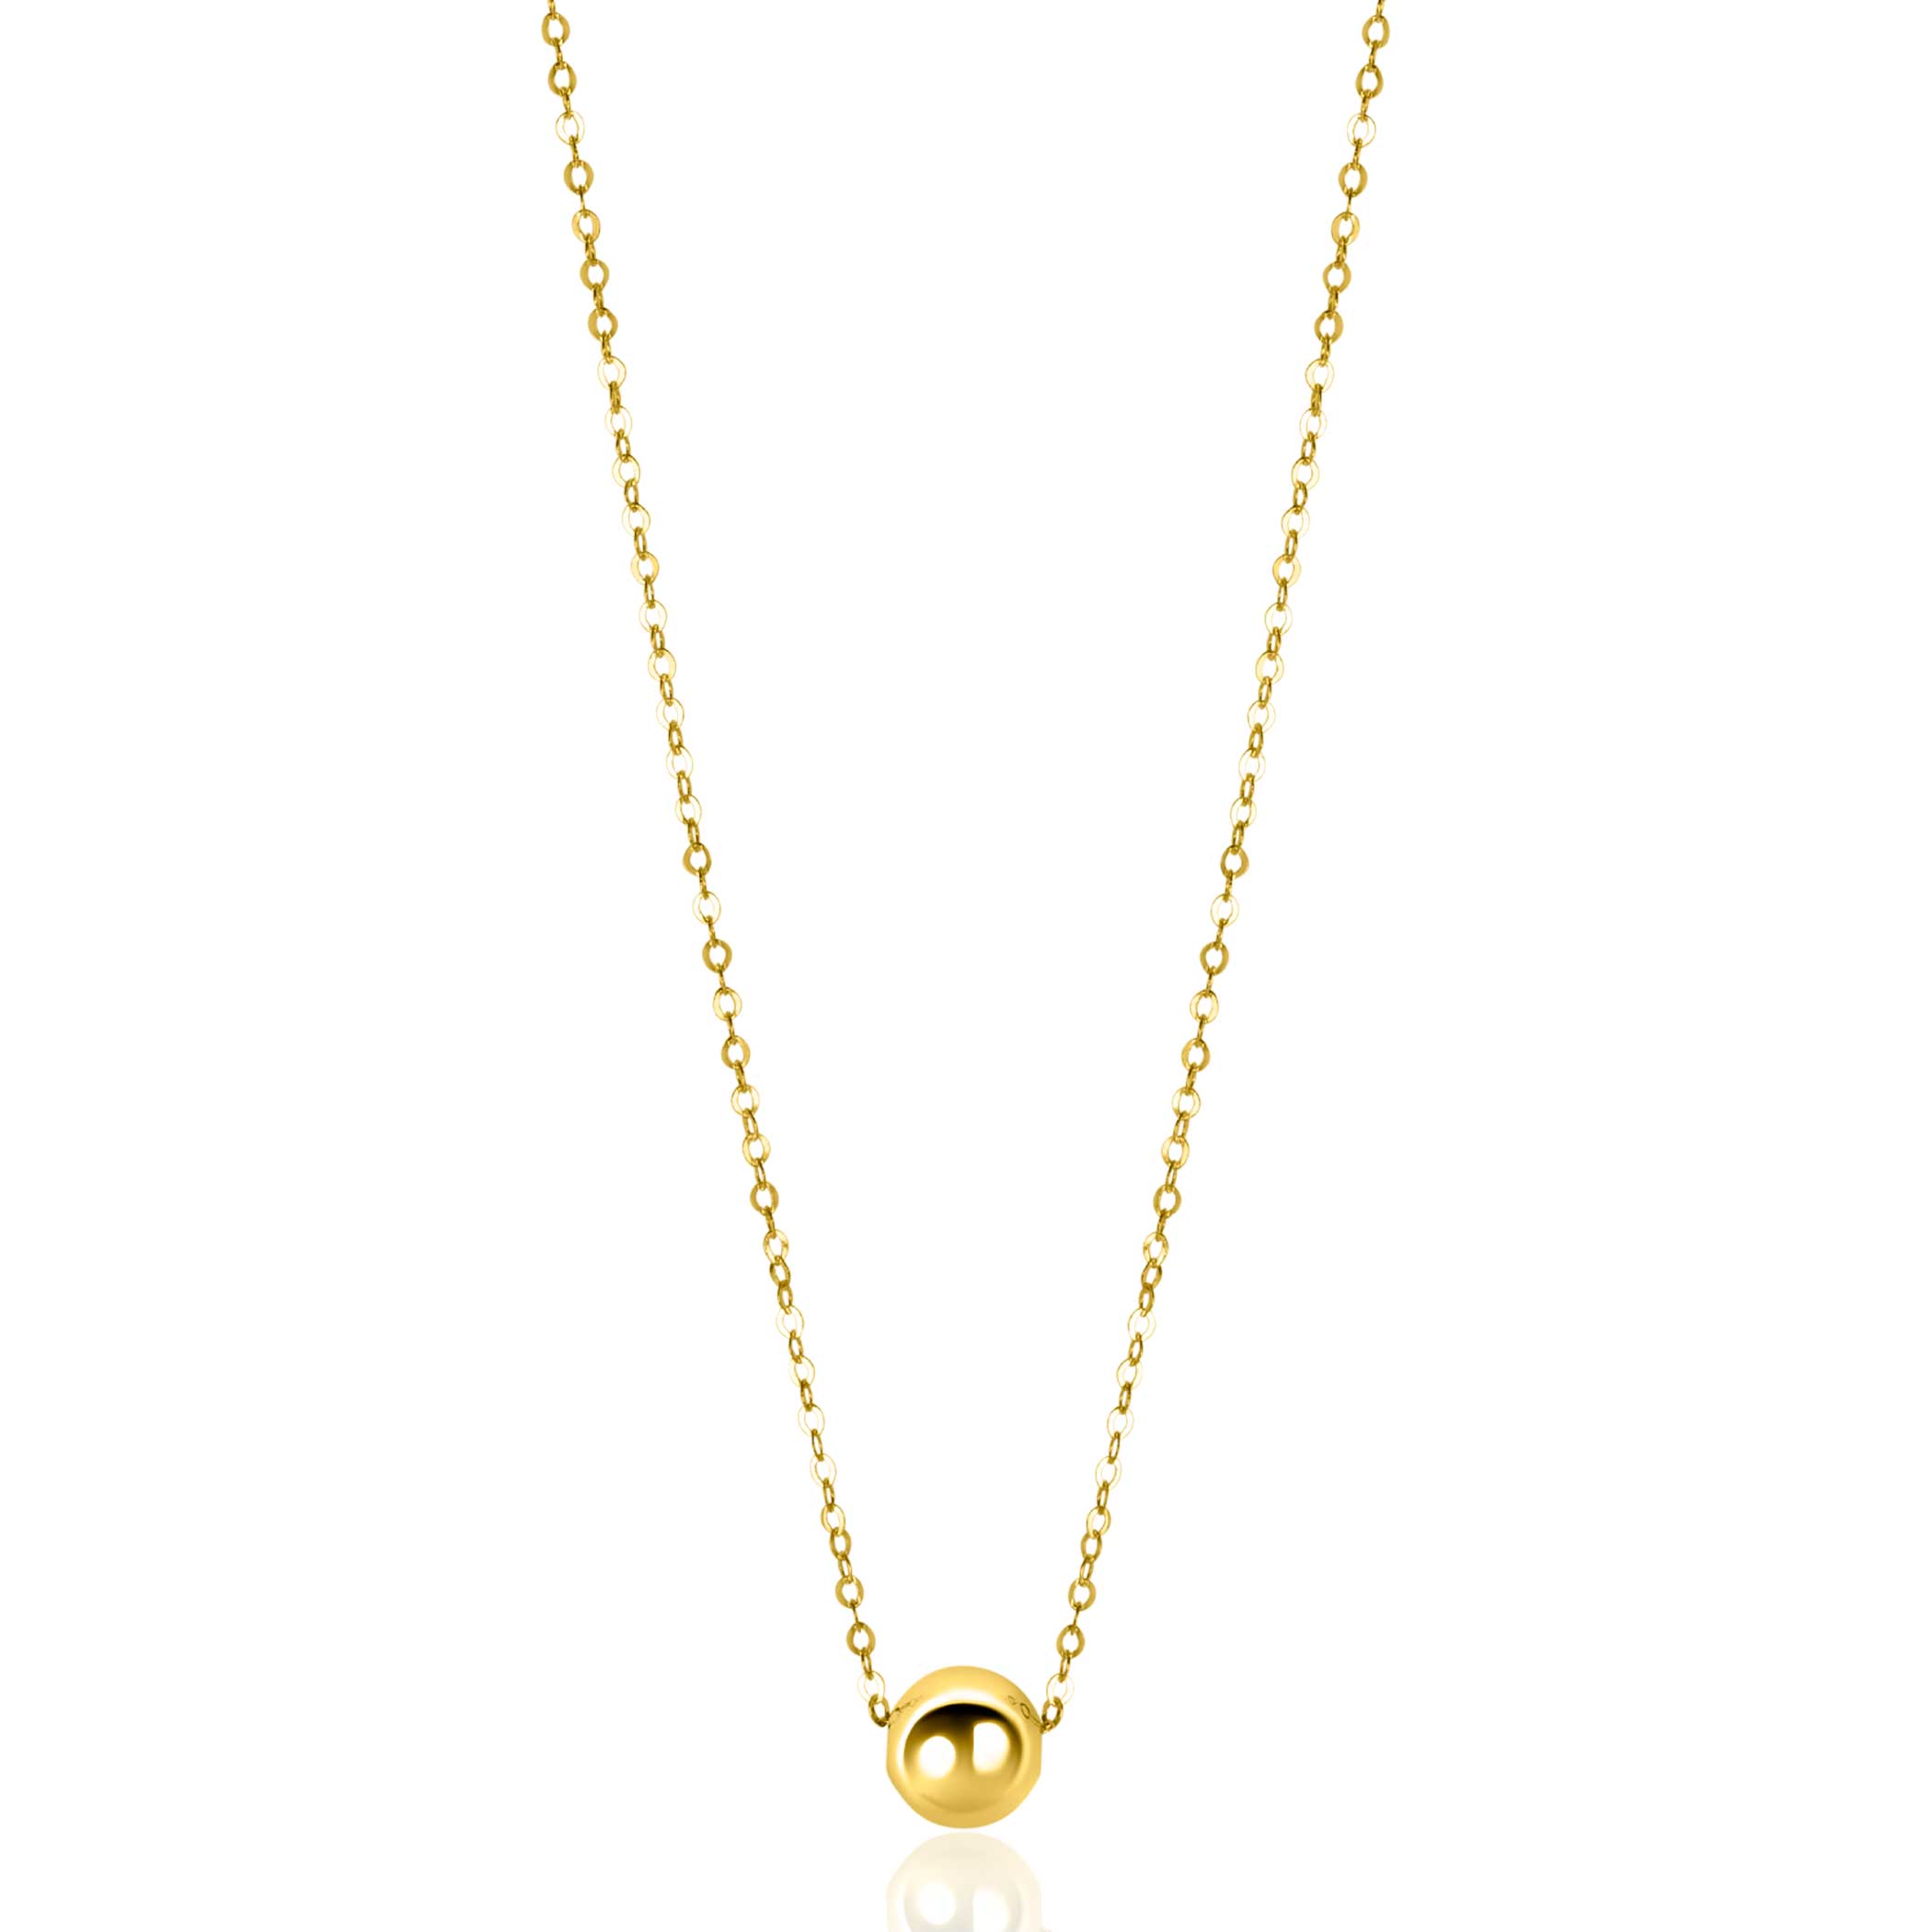 ZINZI Gold 14 carat gold link necklace with elegant smooth bead of 6mm, 42-45cm ZGC505
